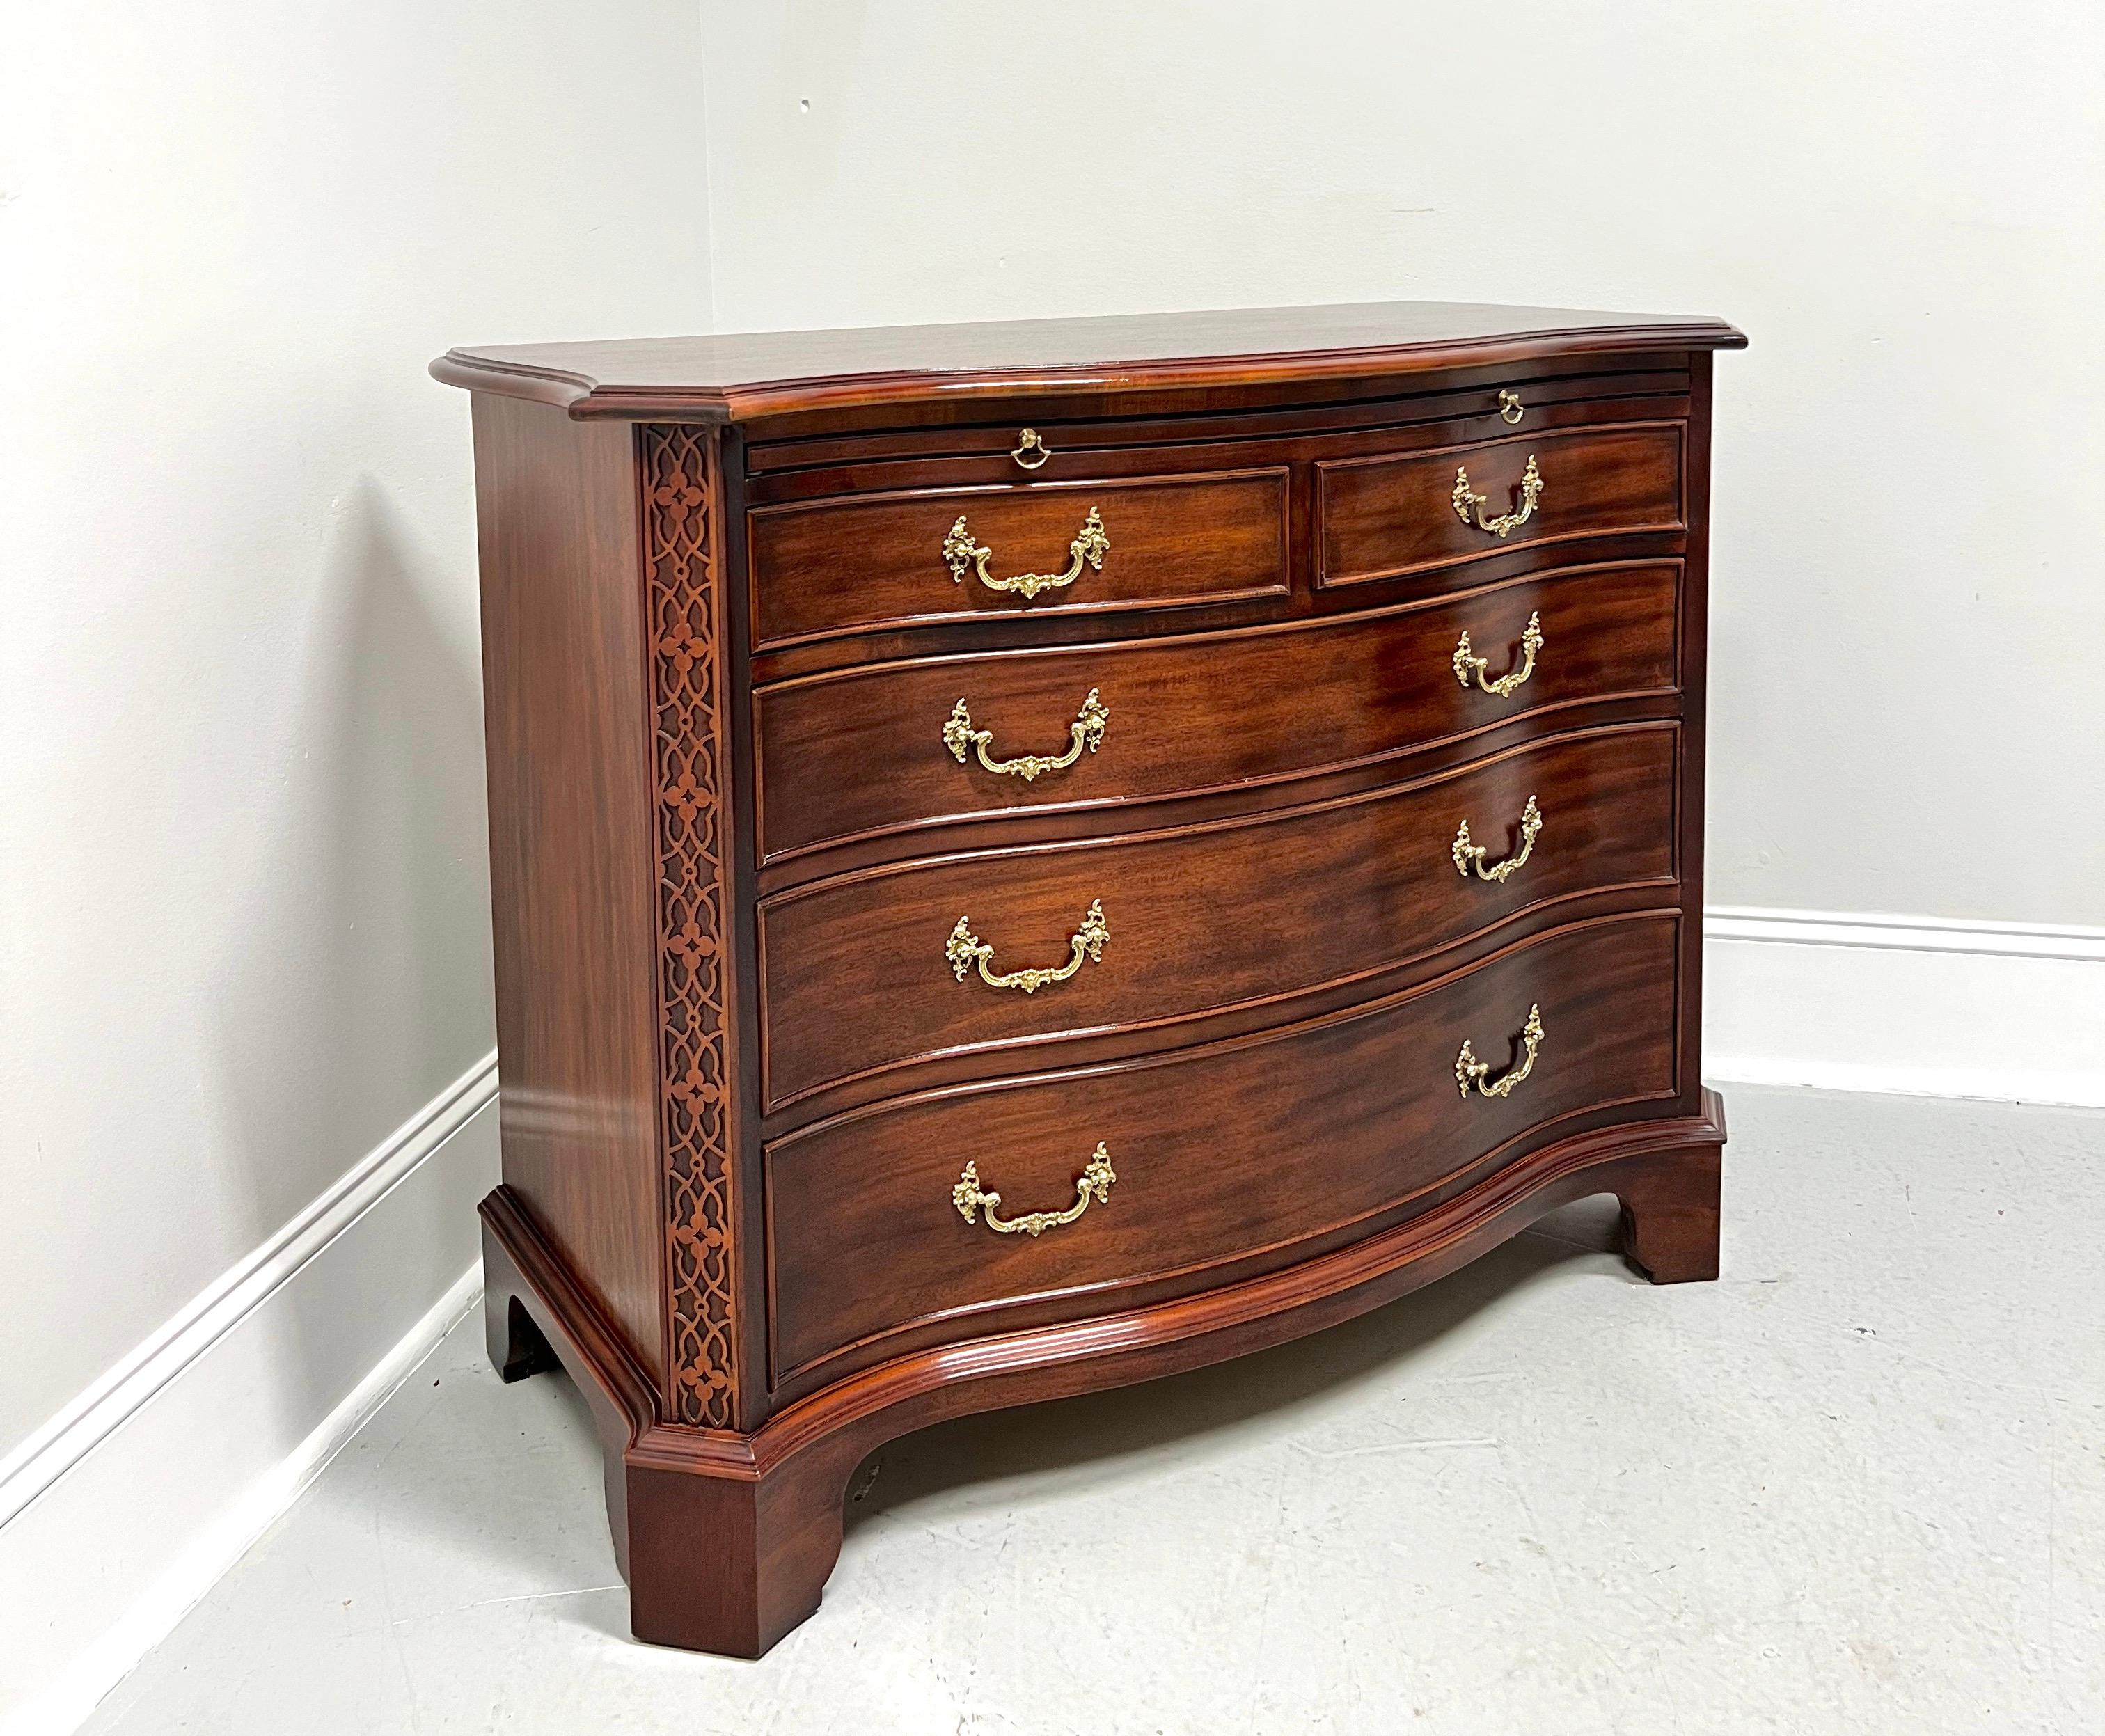 A Chippendale style bachelor chest by Century Furniture. Mahogany with brass hardware, serpentine shape, bevel edge top with clipped corners, pull-out pressing slide, decorative fretwork to front side corners, and bracket feet. Features the pressing